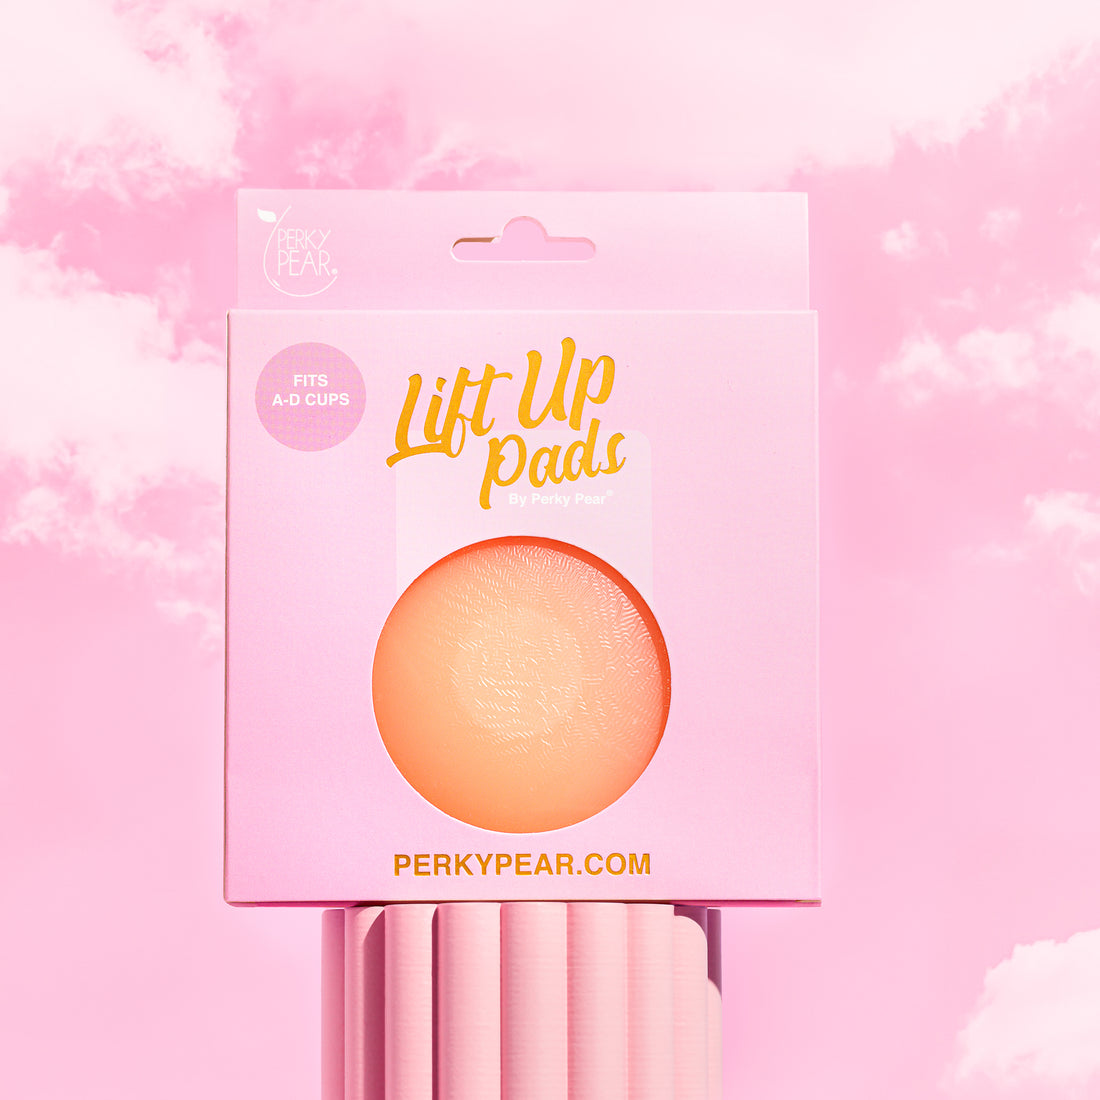 5 x Packs of Lift Up Pads By Perky Pear®